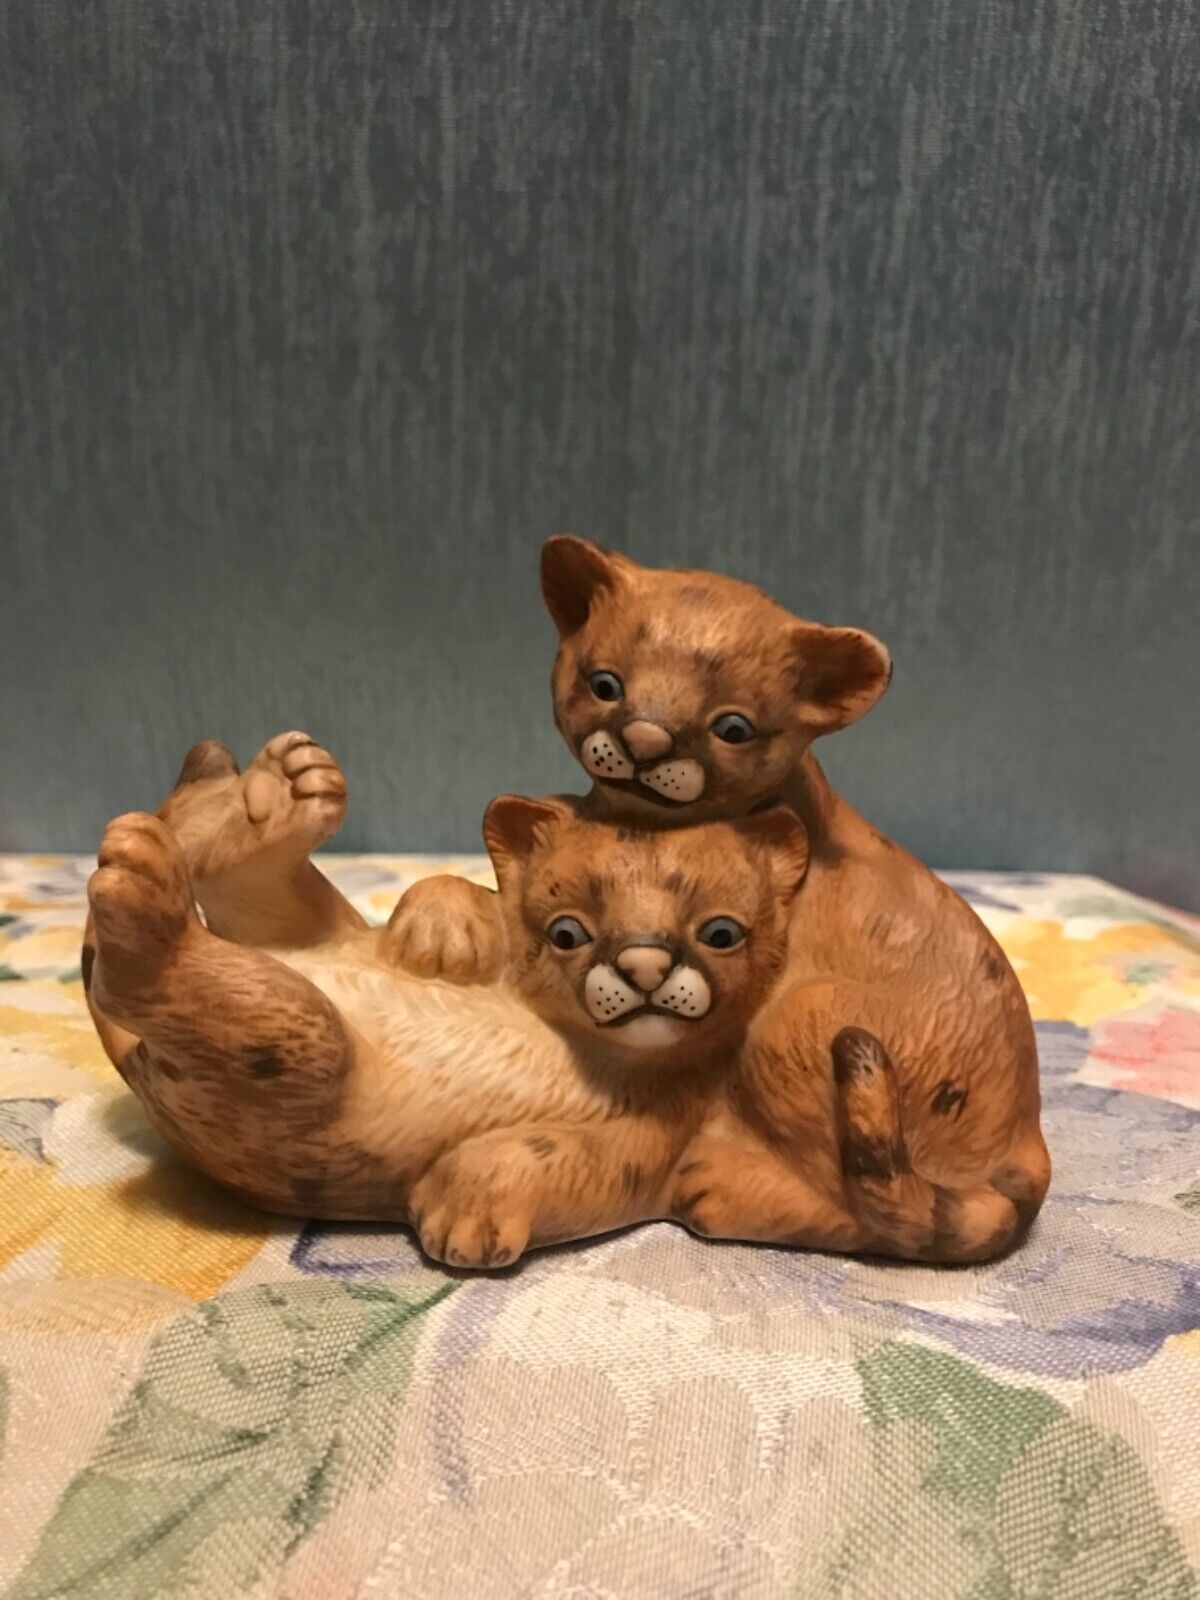 Vintage 1993 Curious Cougars  Masterpiece Porcelain by Homeco